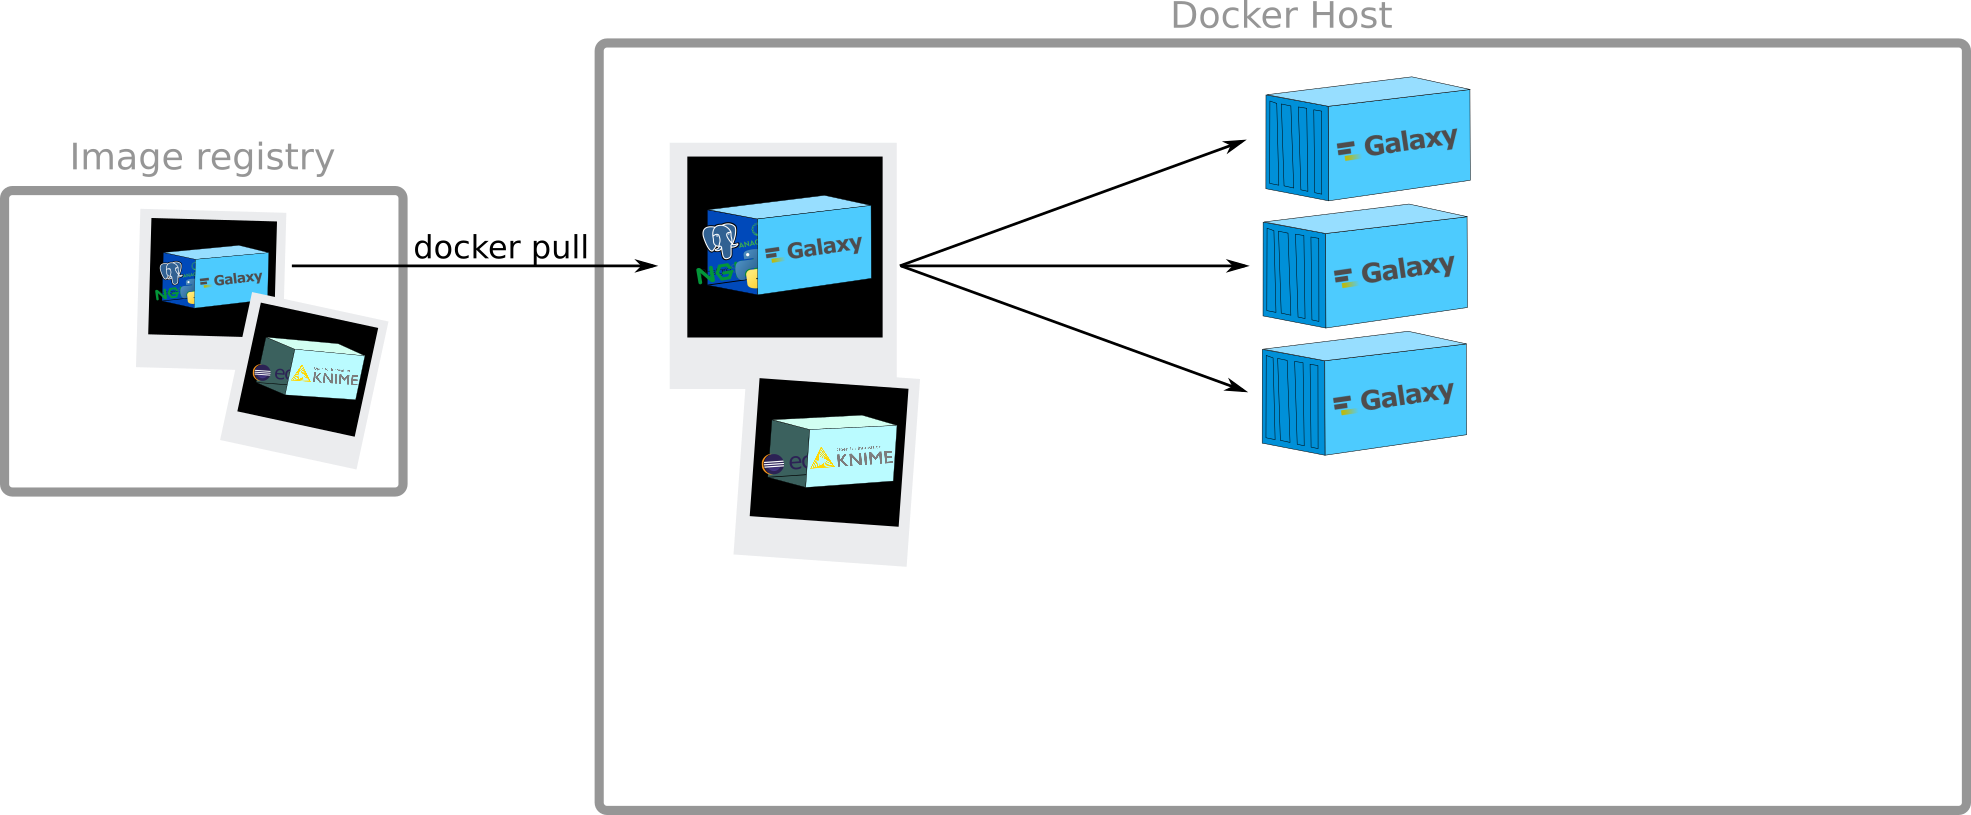 Images are stored in an image registry which are downloaded with docker pull onto a docker host, where you can run multiple instances of galaxy.